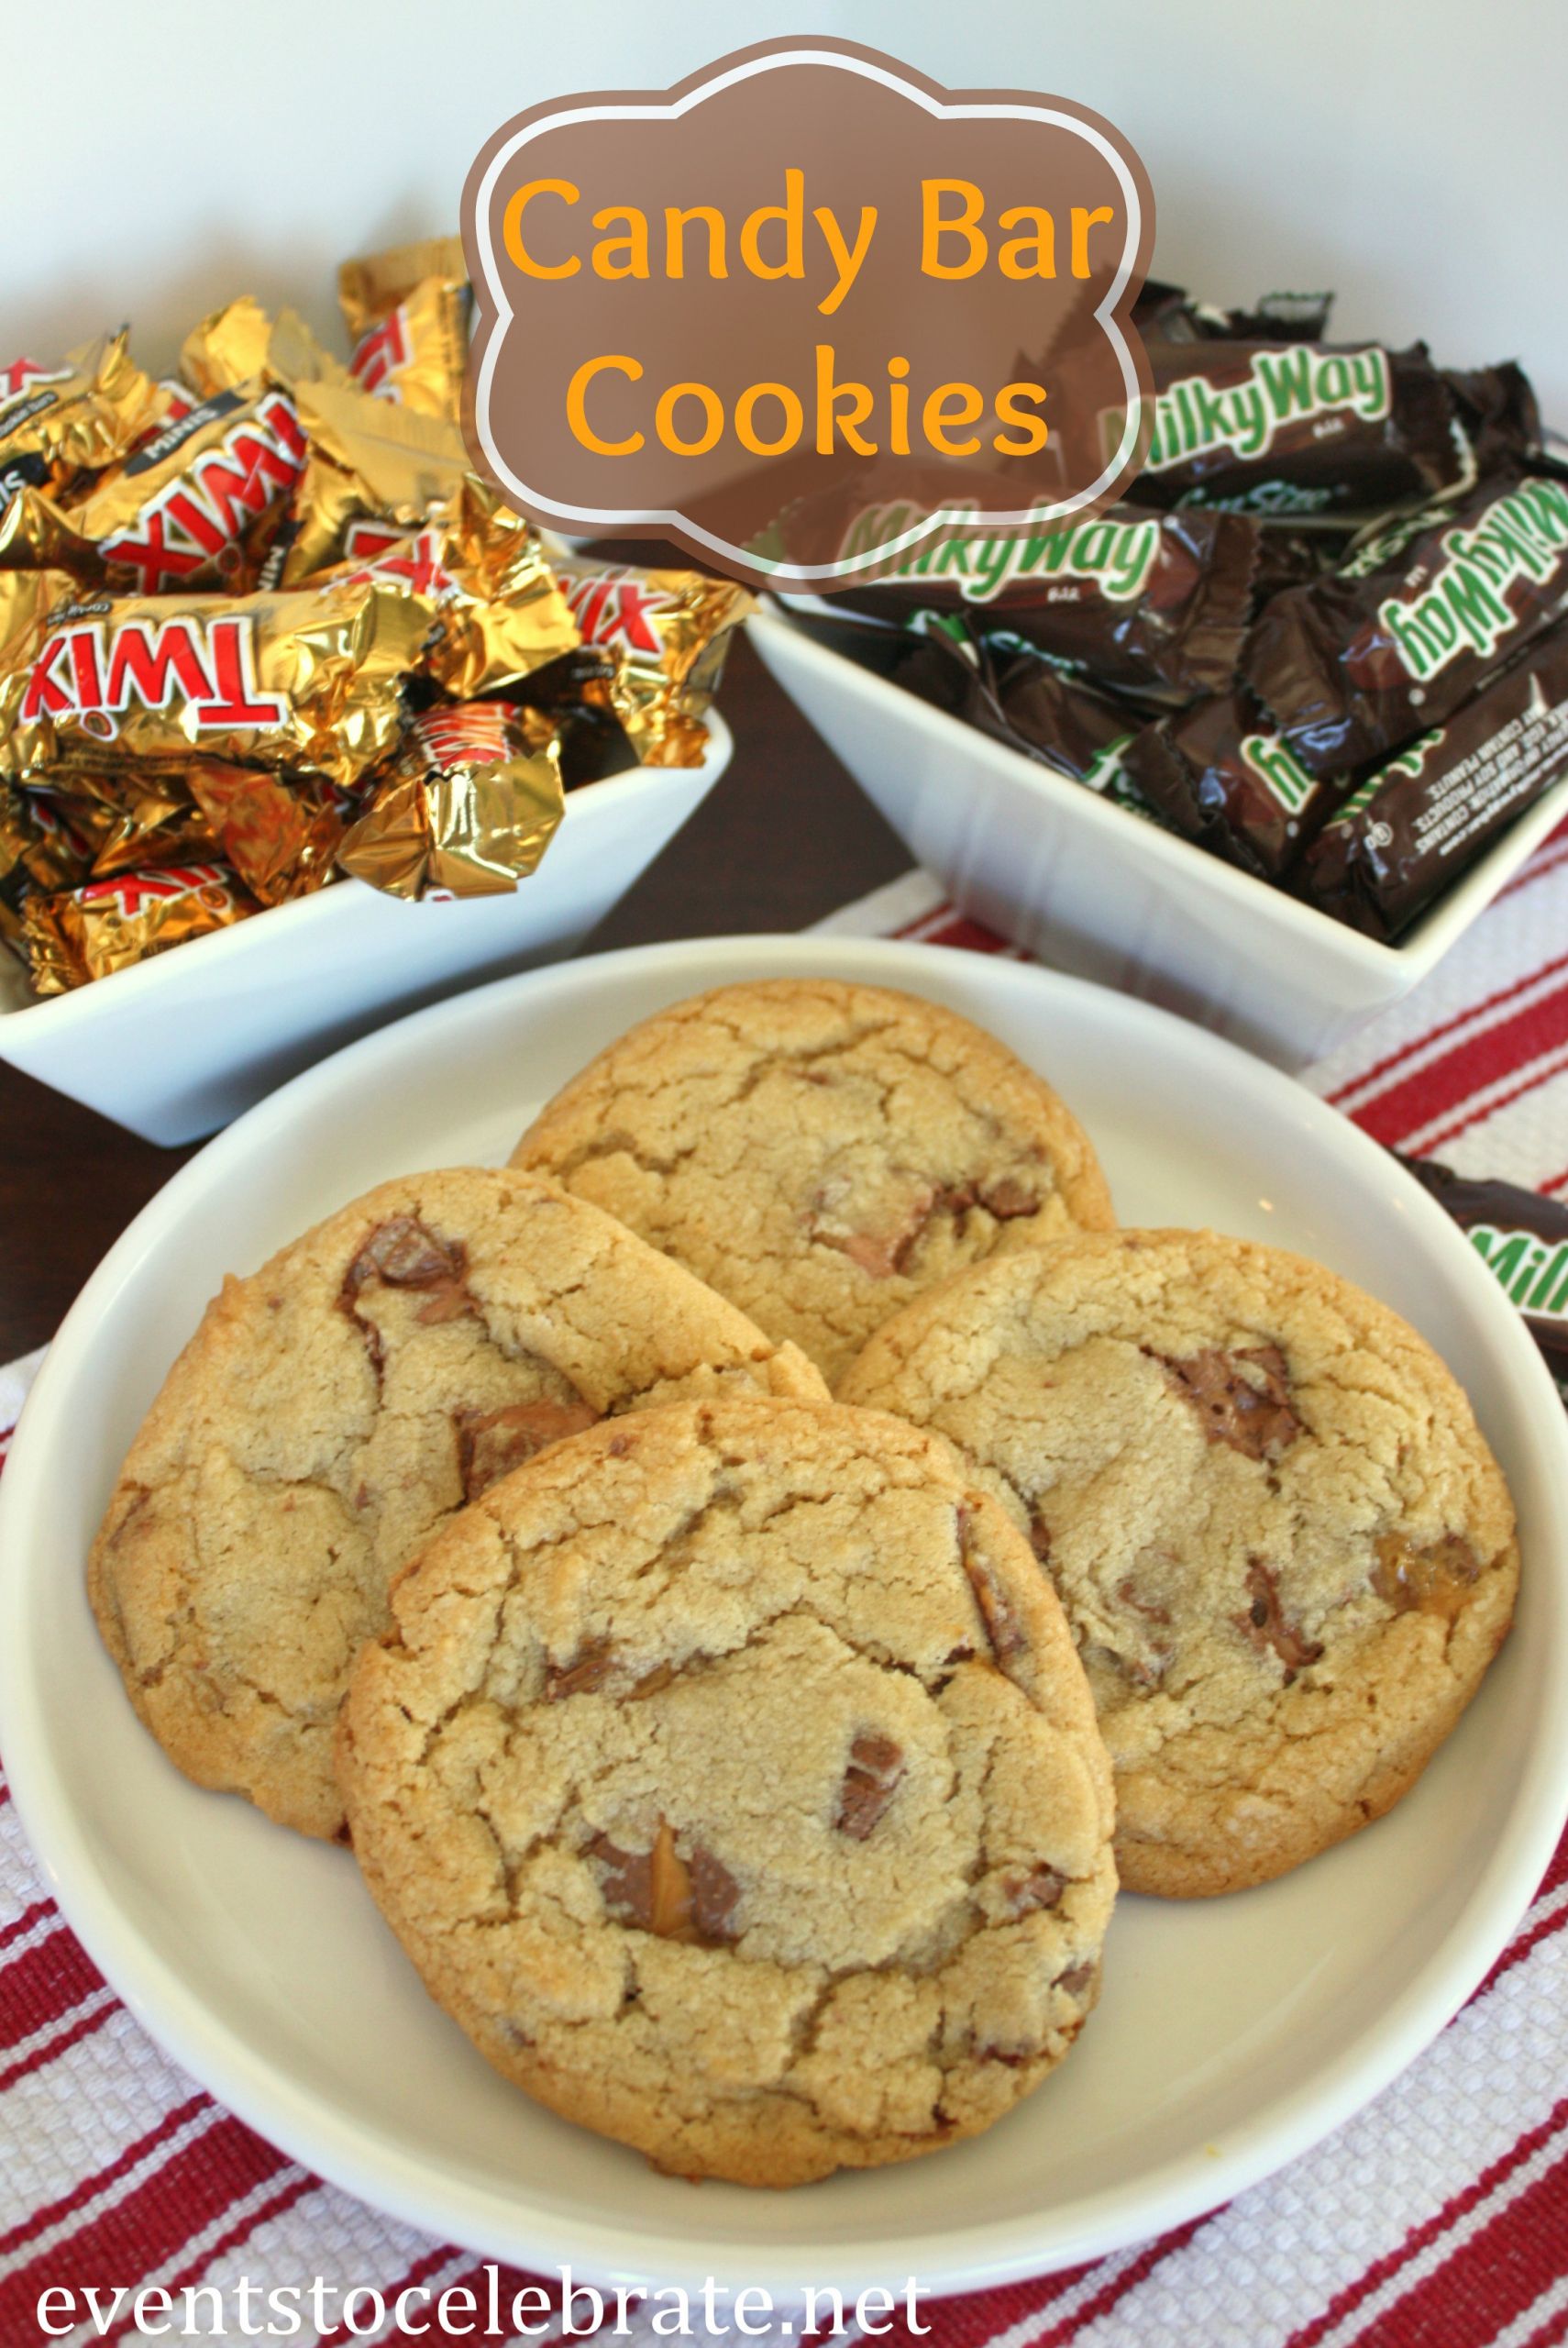 Candy Bar Cookies
 Candy Bar Cookies events to CELEBRATE